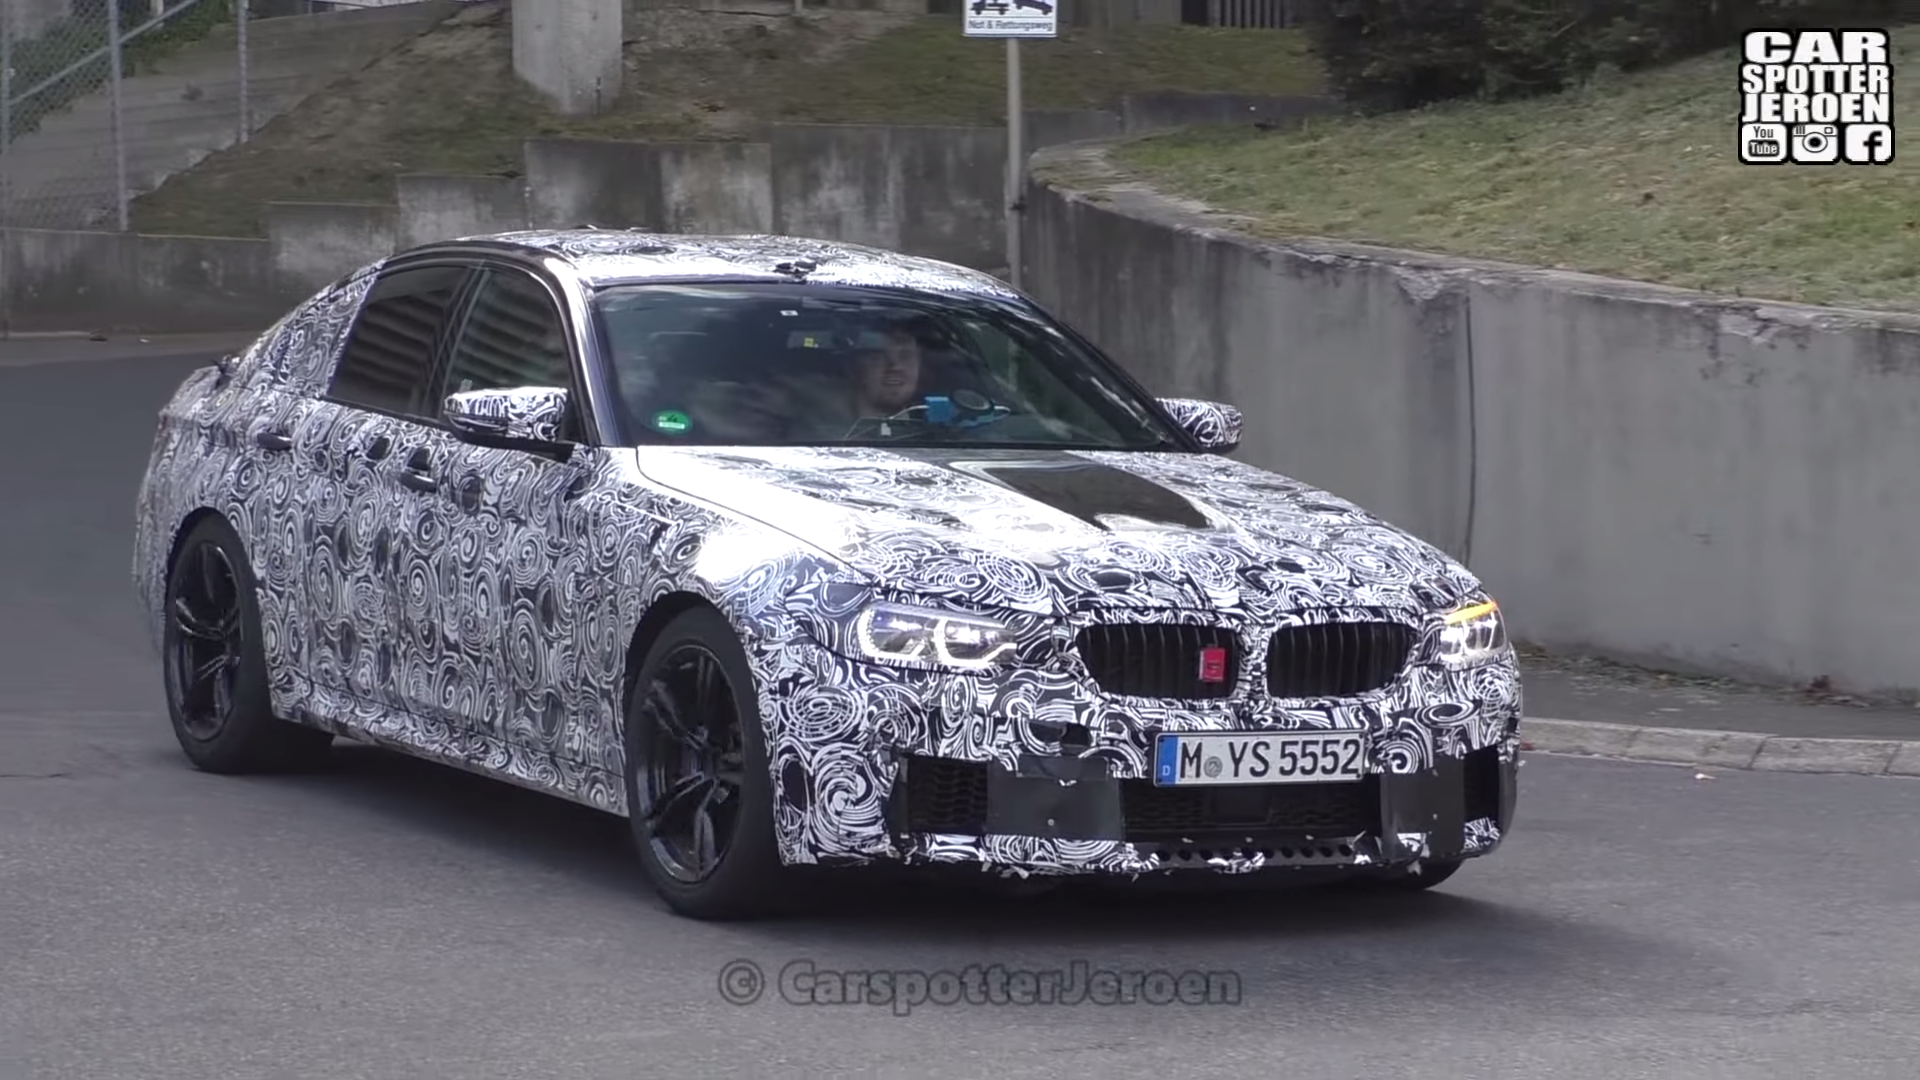 Video Shows 2018 BMW M5 Hanging Out on Streets Near the Nurburgring